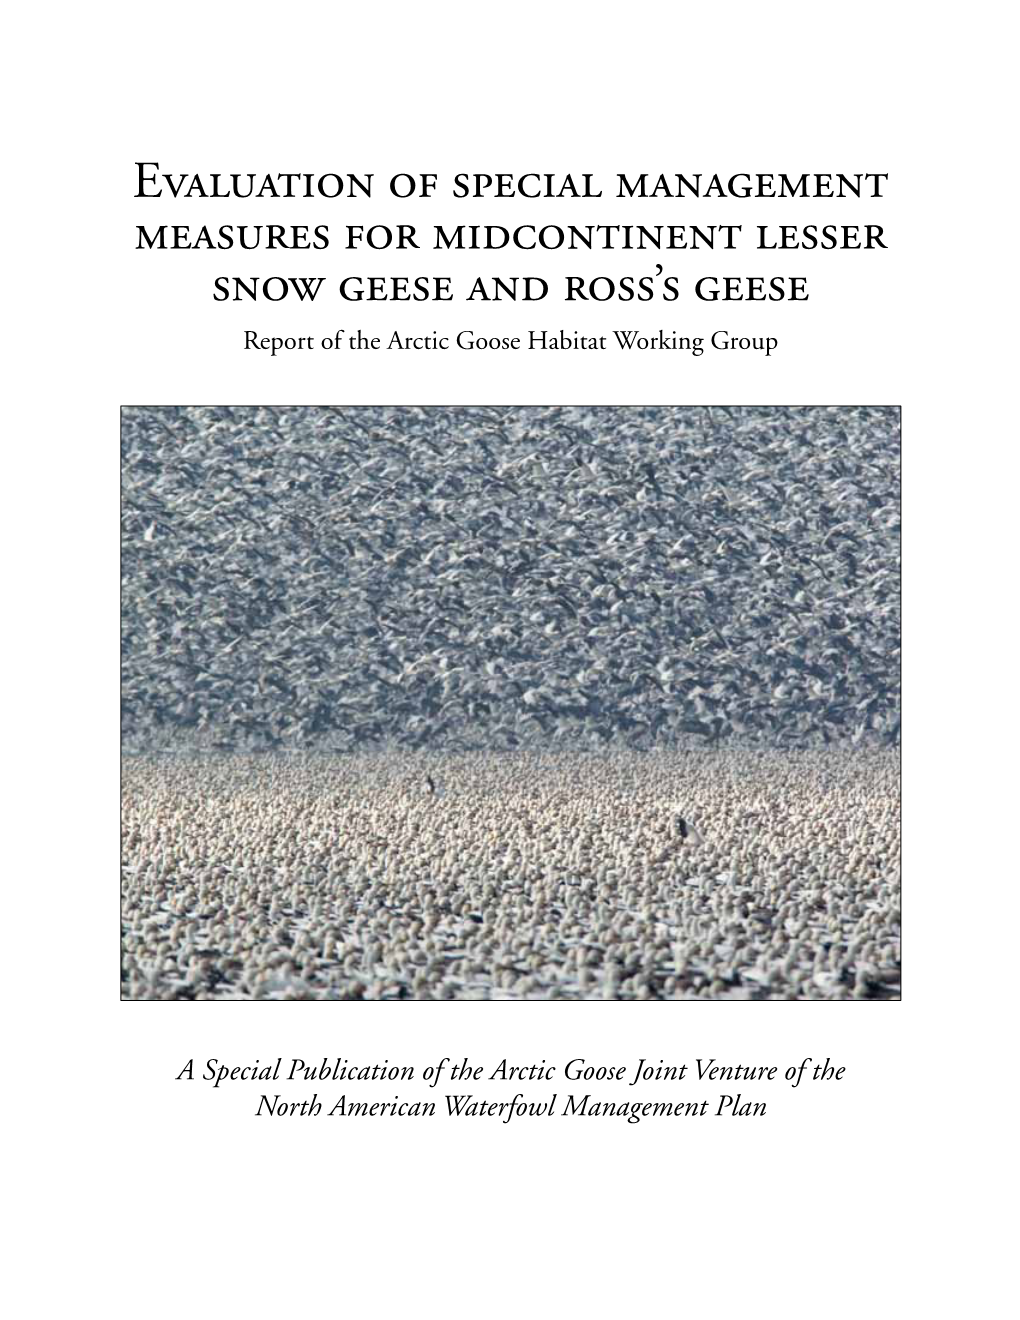 Evaluation of Special Management Measures for Midcontinent Lesser Snow Geese and Ross’S Geese Report of the Arctic Goose Habitat Working Group